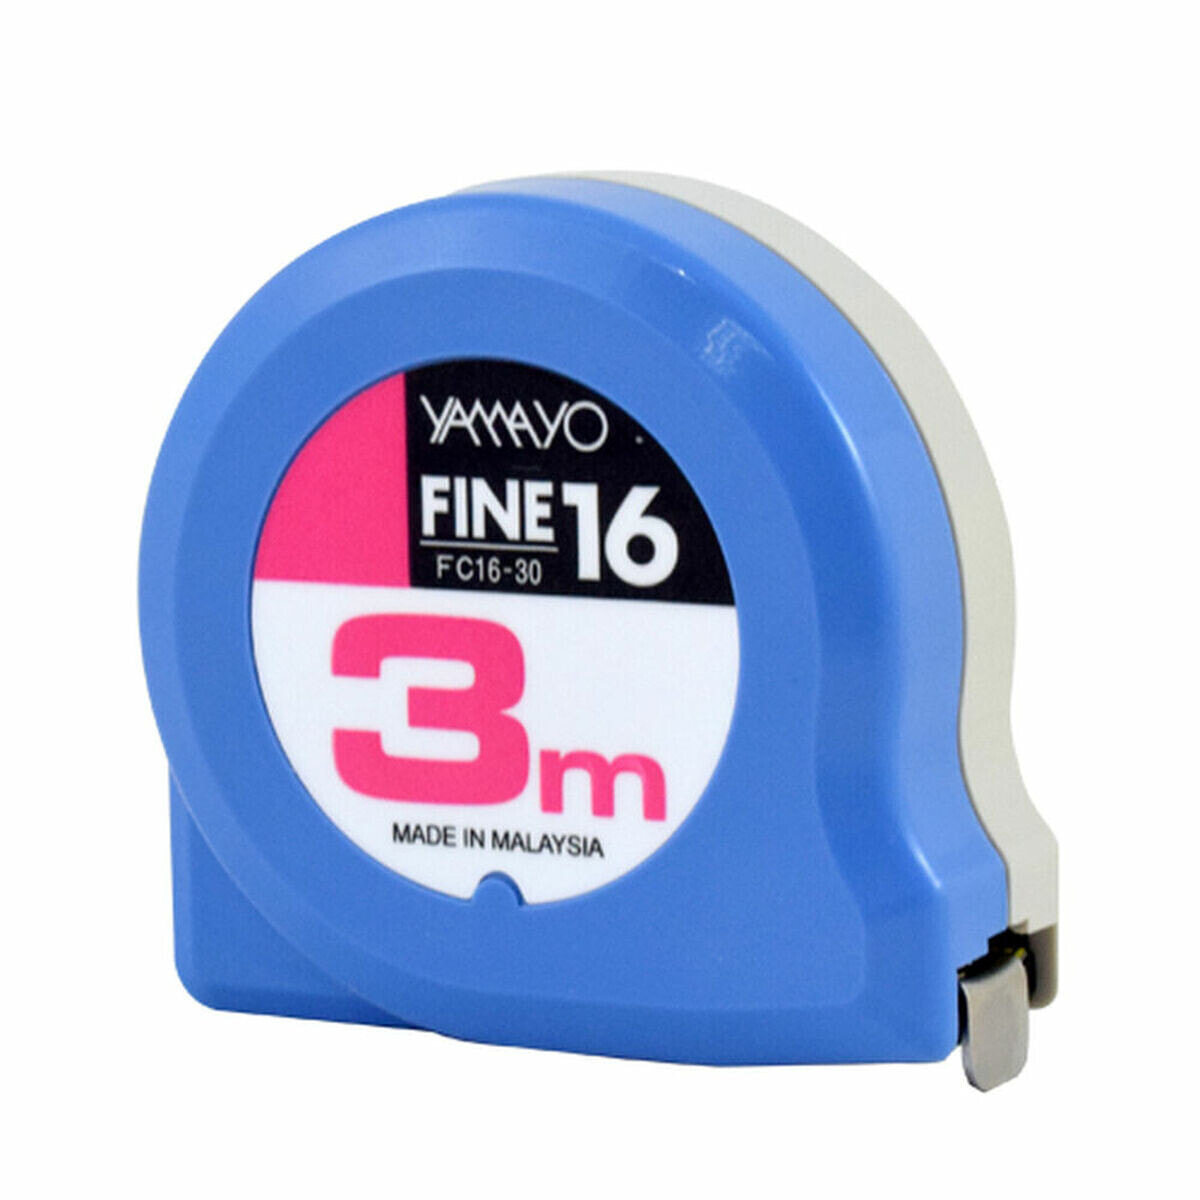 Tape Measure Yamayo 3 m ABS Carbon Steel